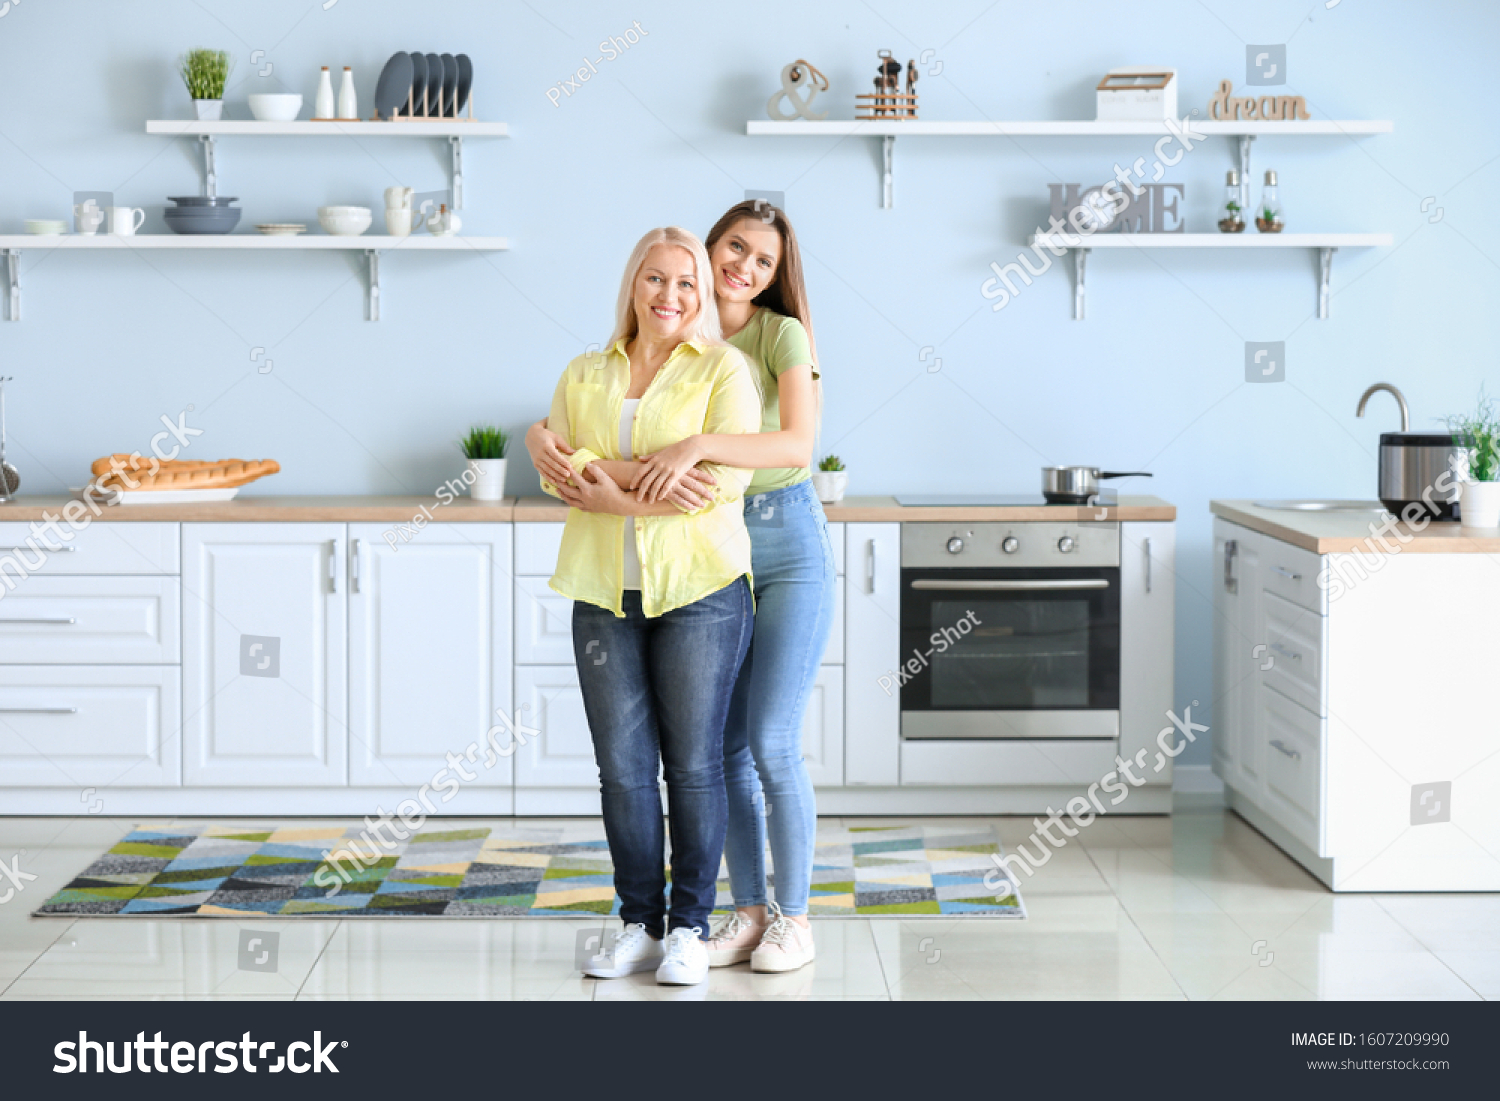 Mature woman and her adult daughter together in kitchen #1607209990